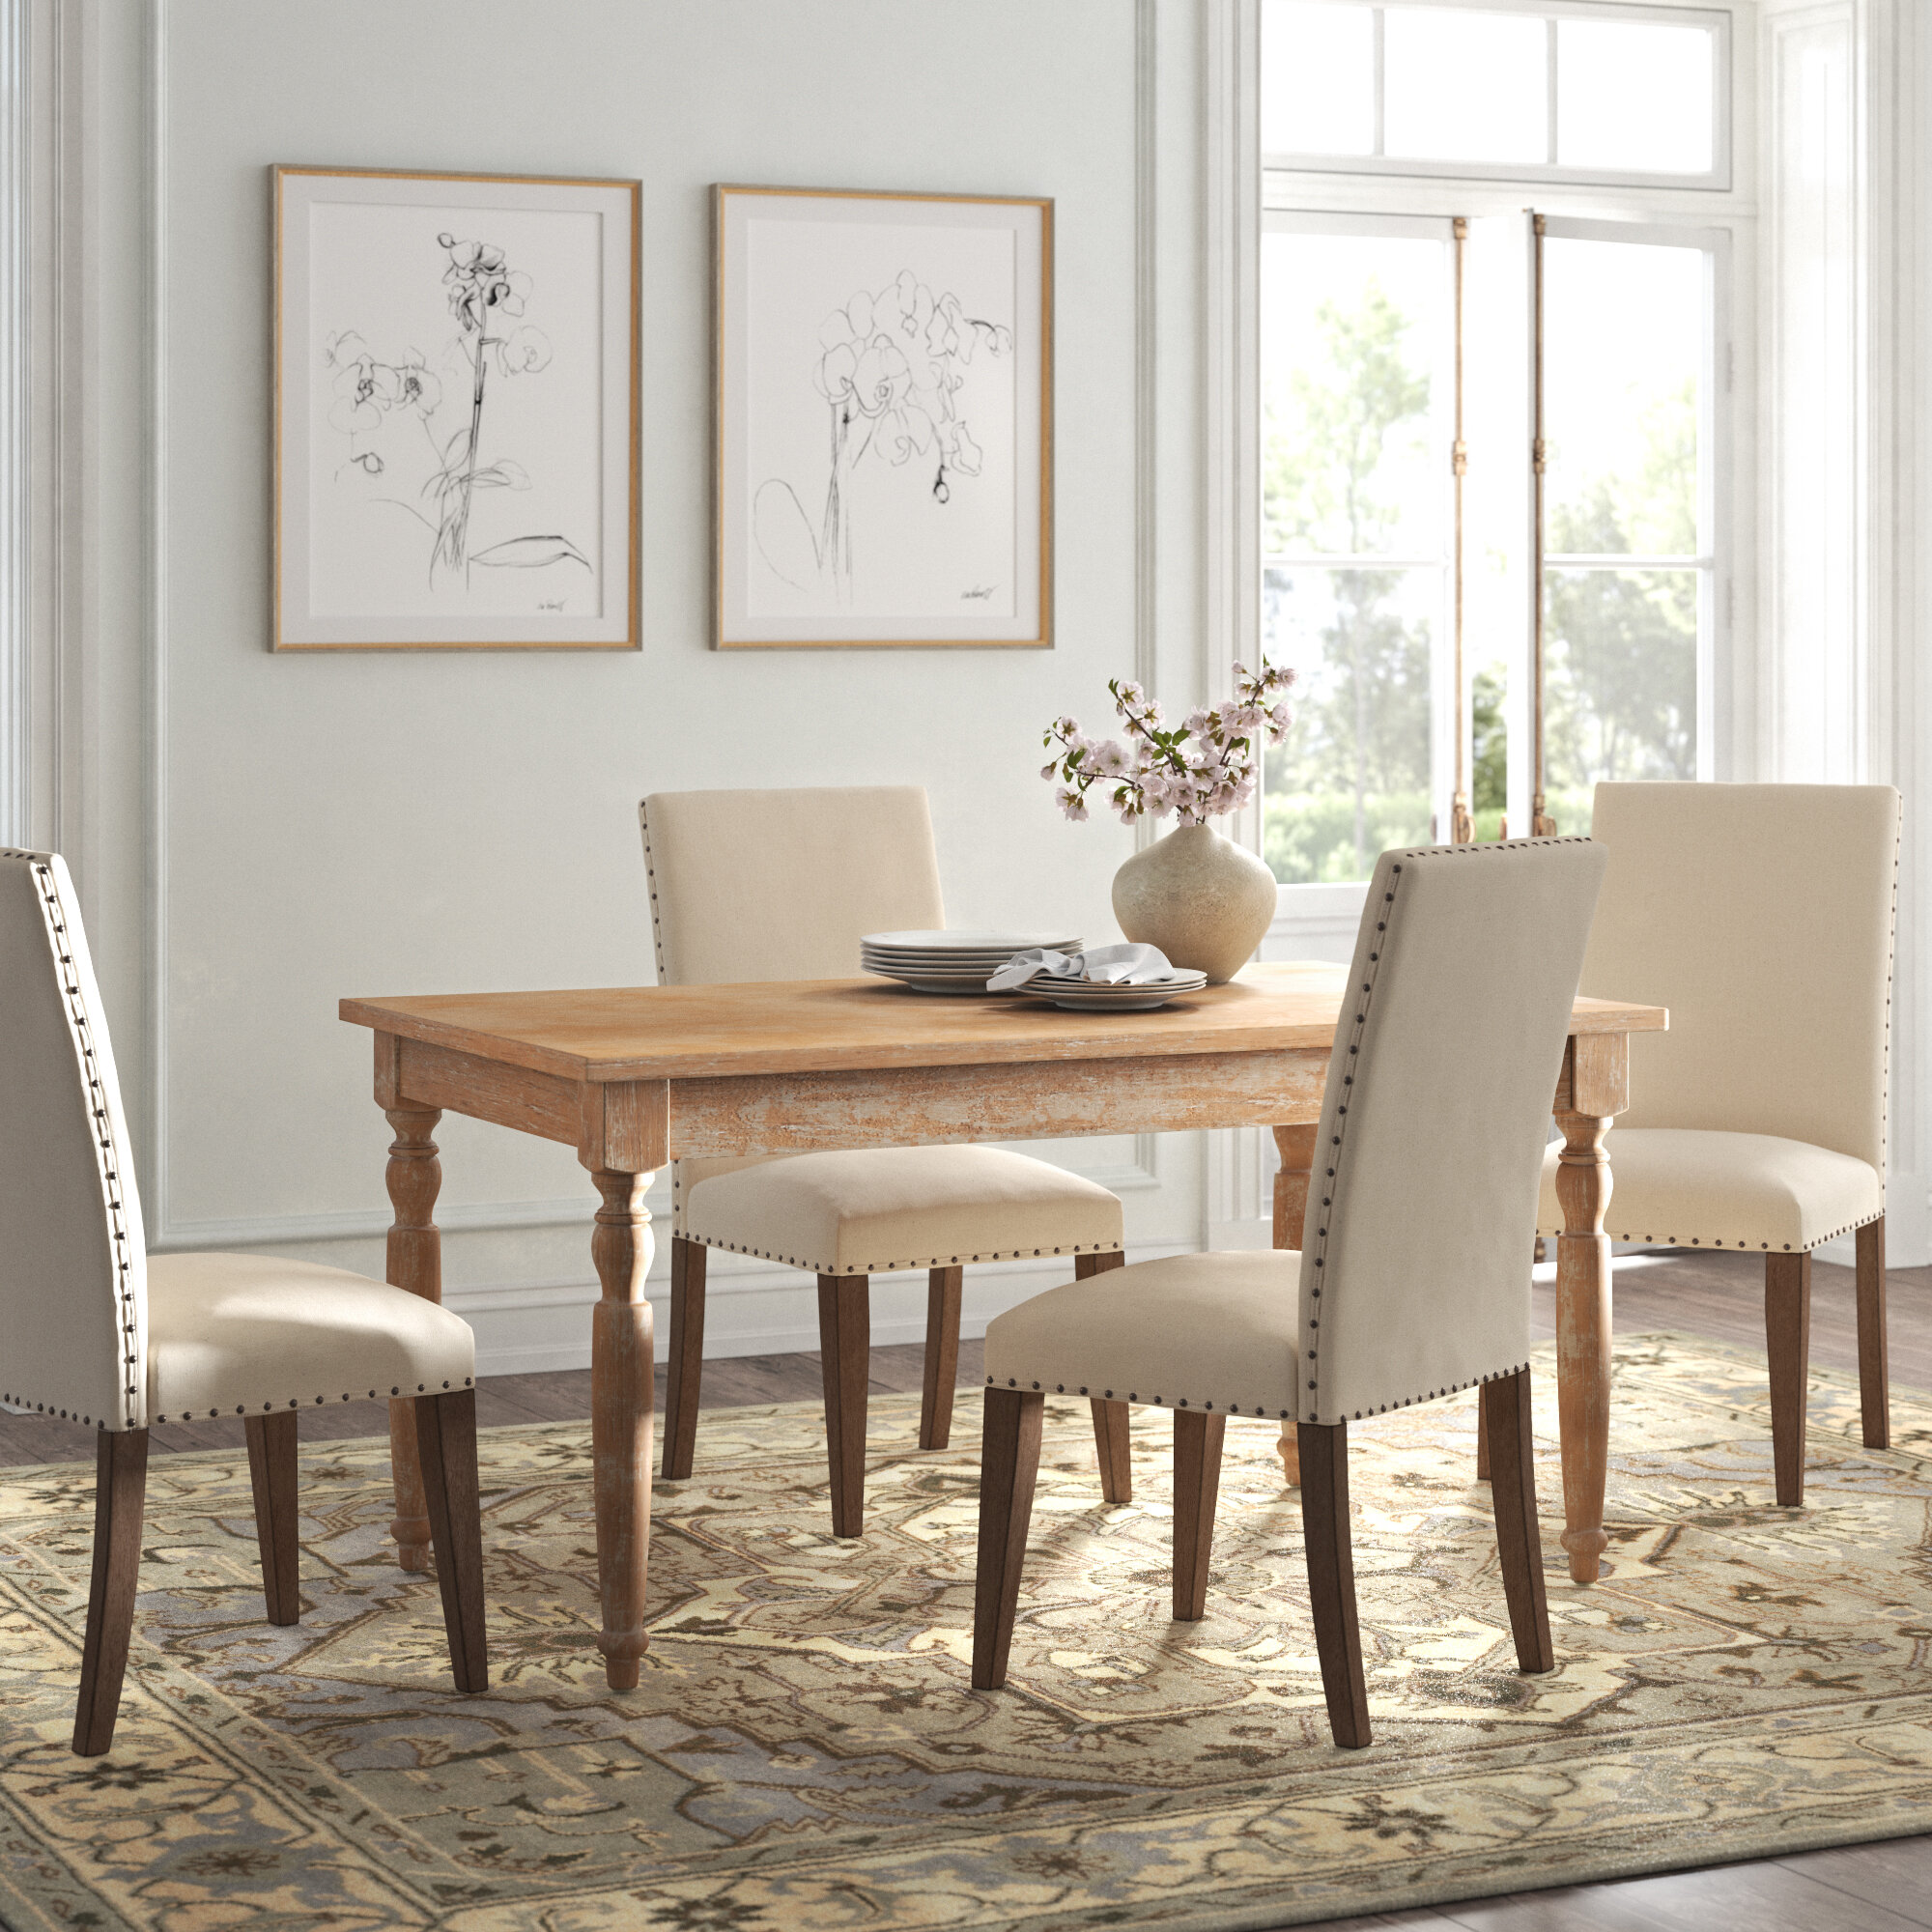 Kelly clarkson dining room chairs